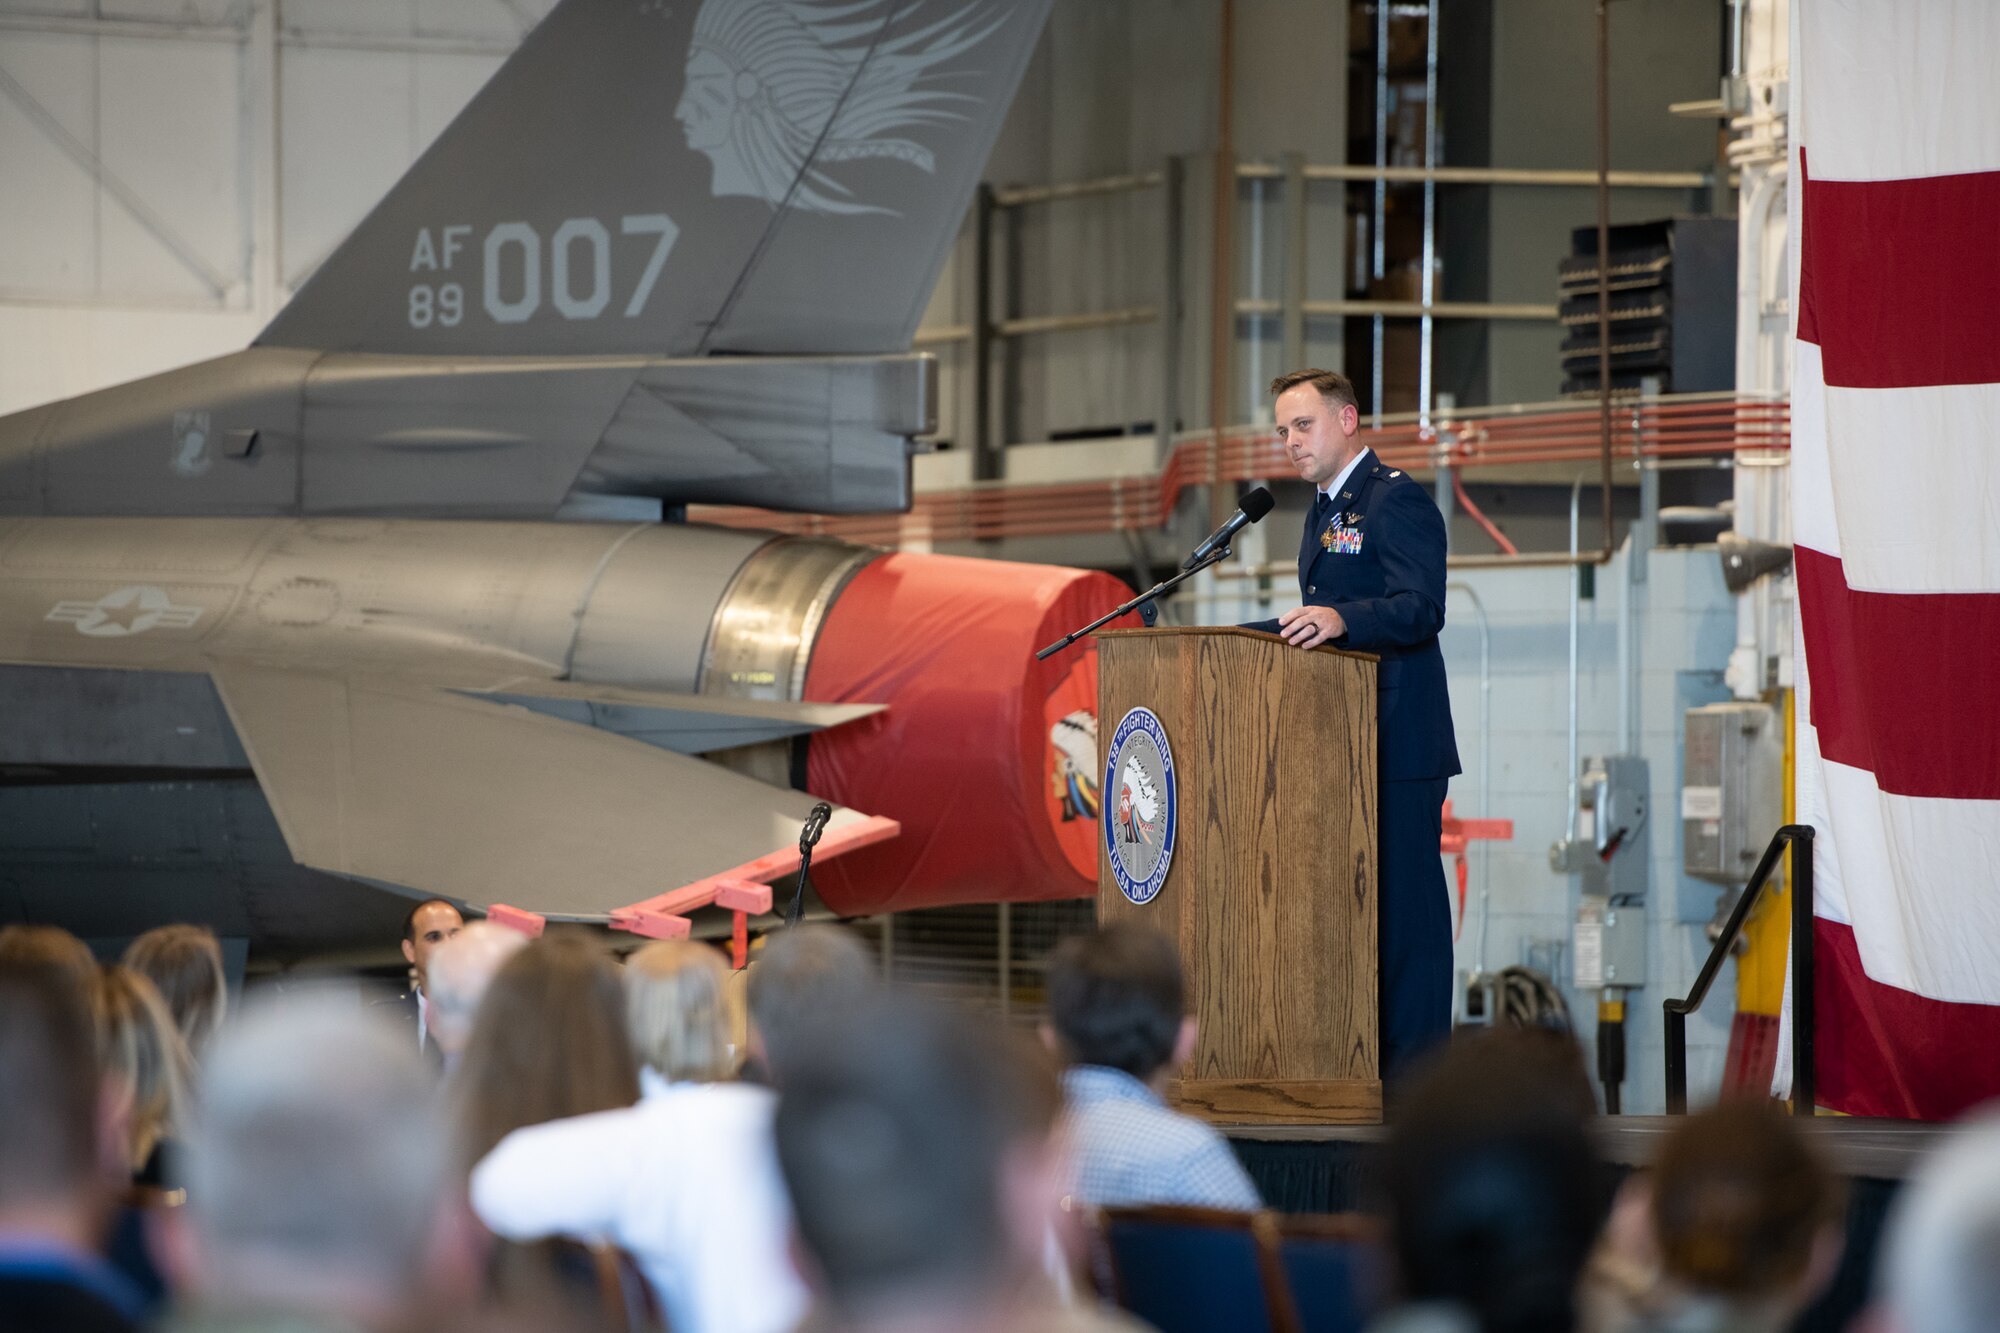 Lt. Col. Michael Coloney, 125th Fighter Squadron director of operations, speaks during a ceremony at the Tulsa Air National Guard Base, Okla., Dec. 5, 2021. Coloney was awarded the Distinguished Flying Cross for his heroism during a mission over Afghanistan in 2018. (Oklahoma Air National Guard Photo by Tech. Sgt. Rebecca Imwalle)